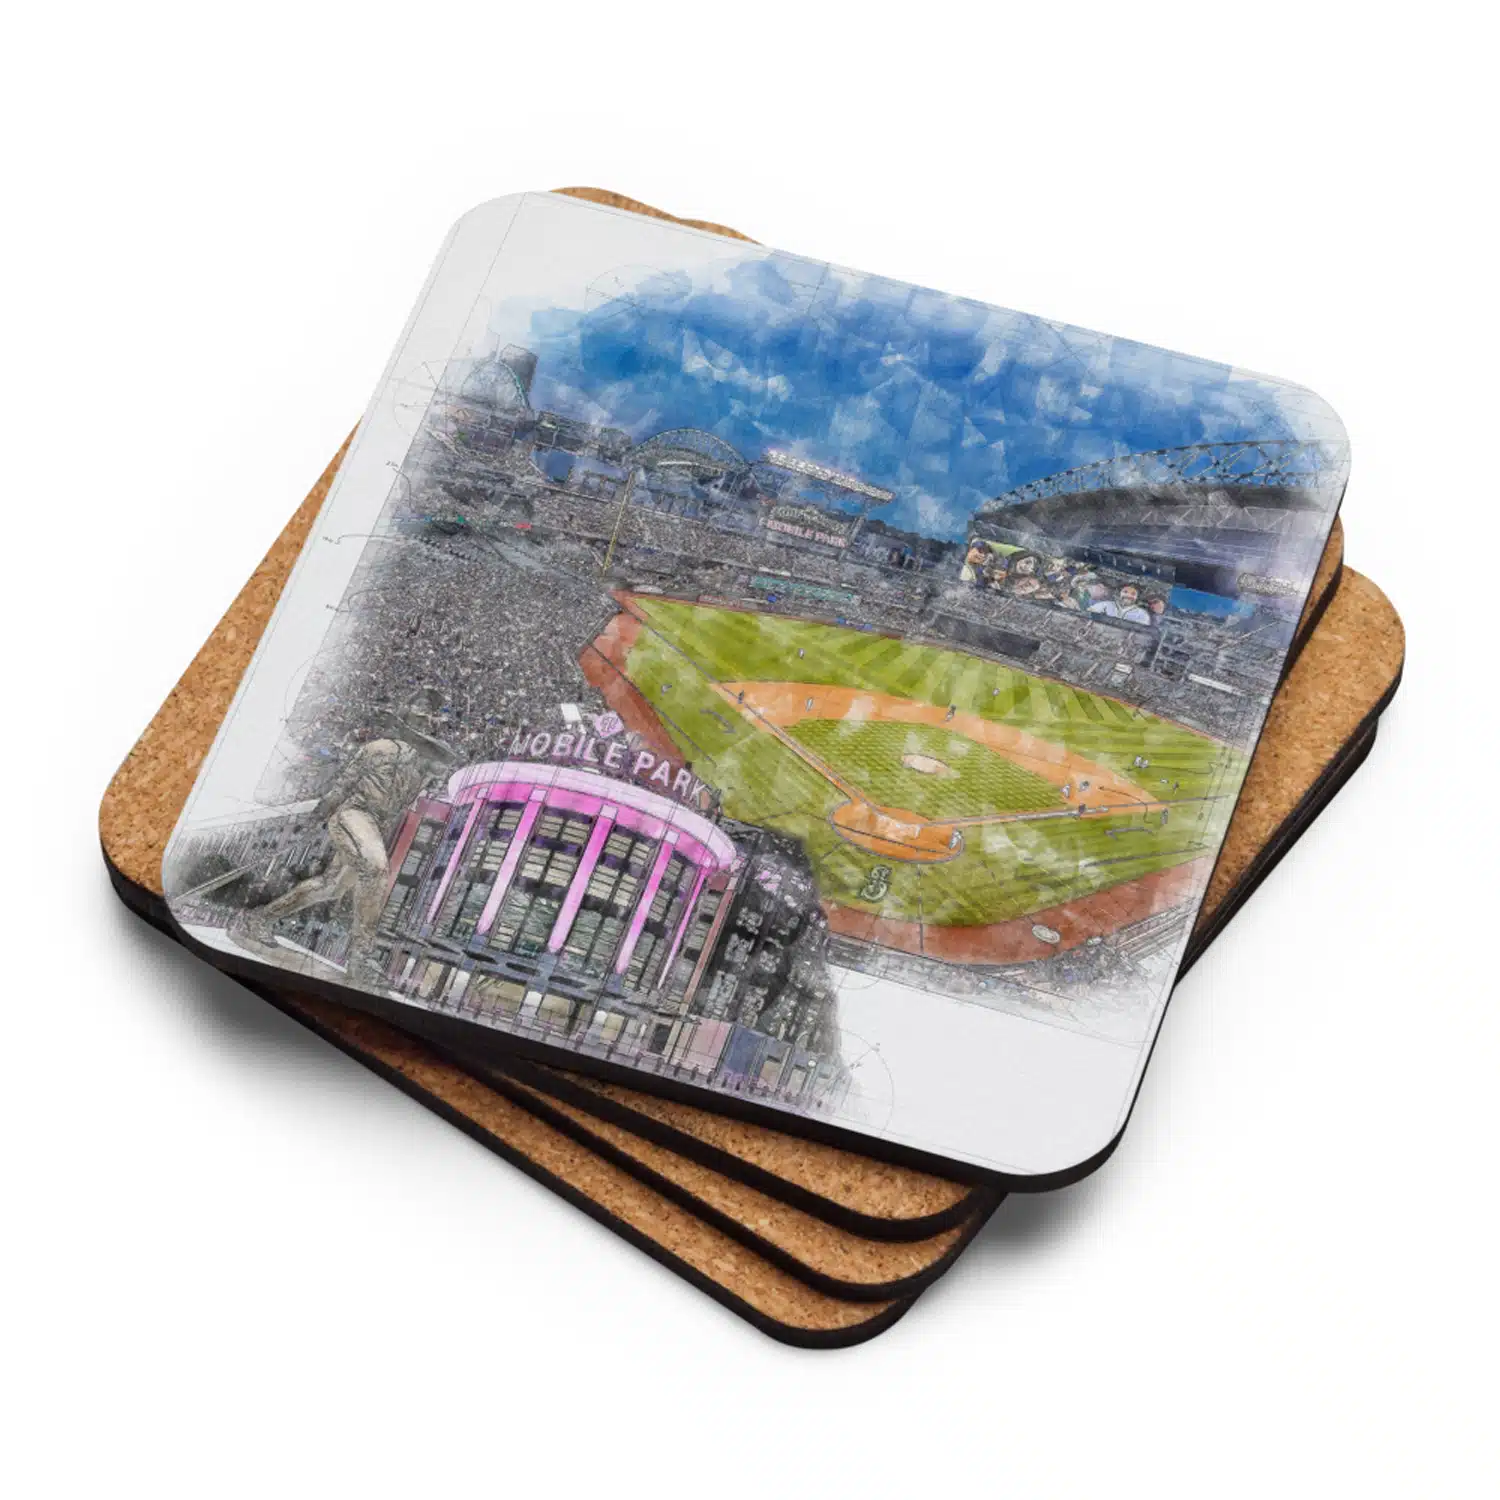 T-Mobile Park High Gloss Coated, Cork-Backed Drink Coaster, Seattle Mariners Baseball